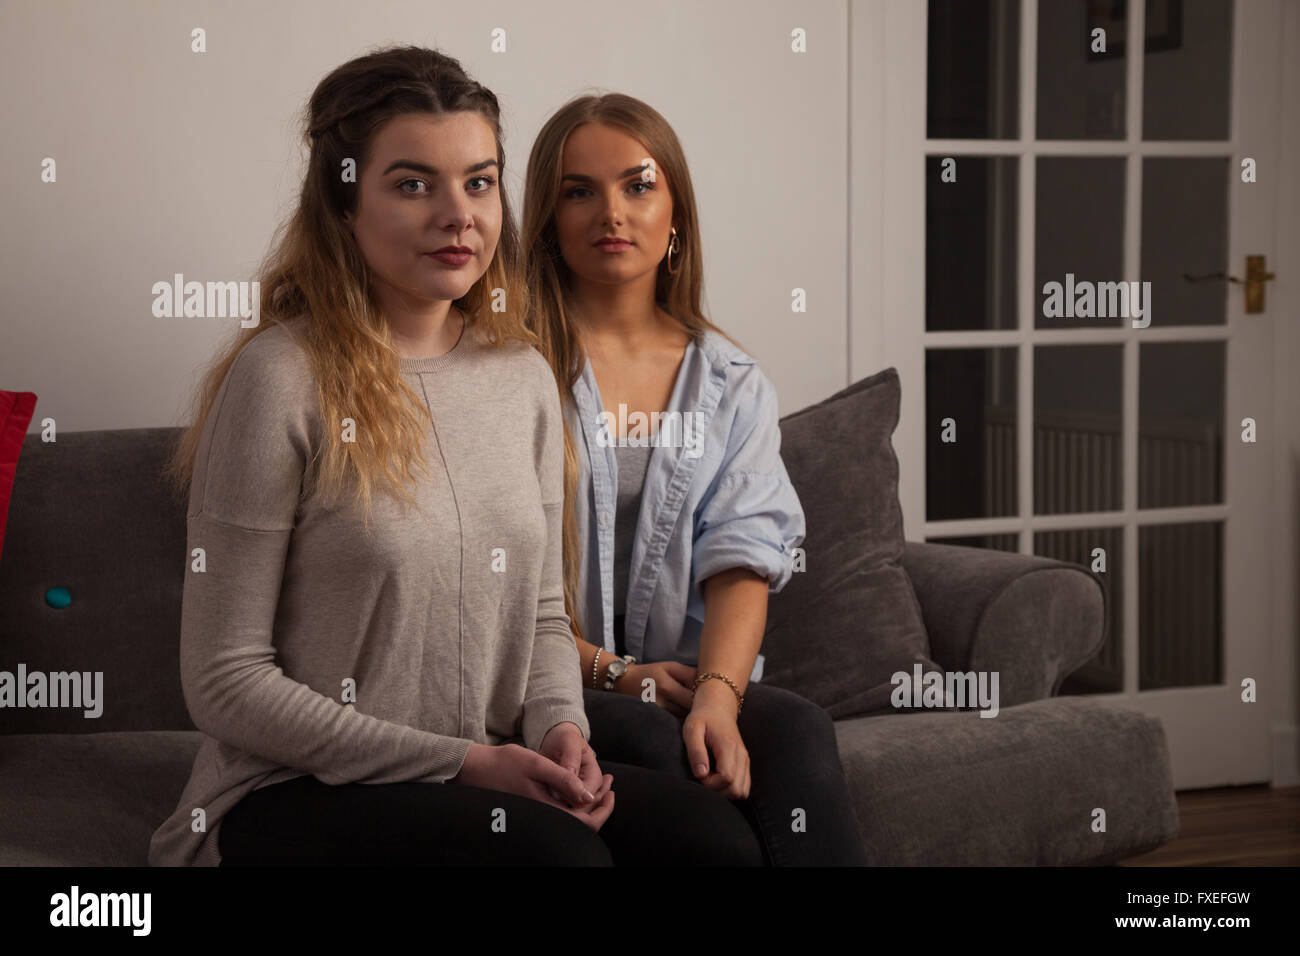 Two young women comforting each other at home on a sofa. Stock Photo